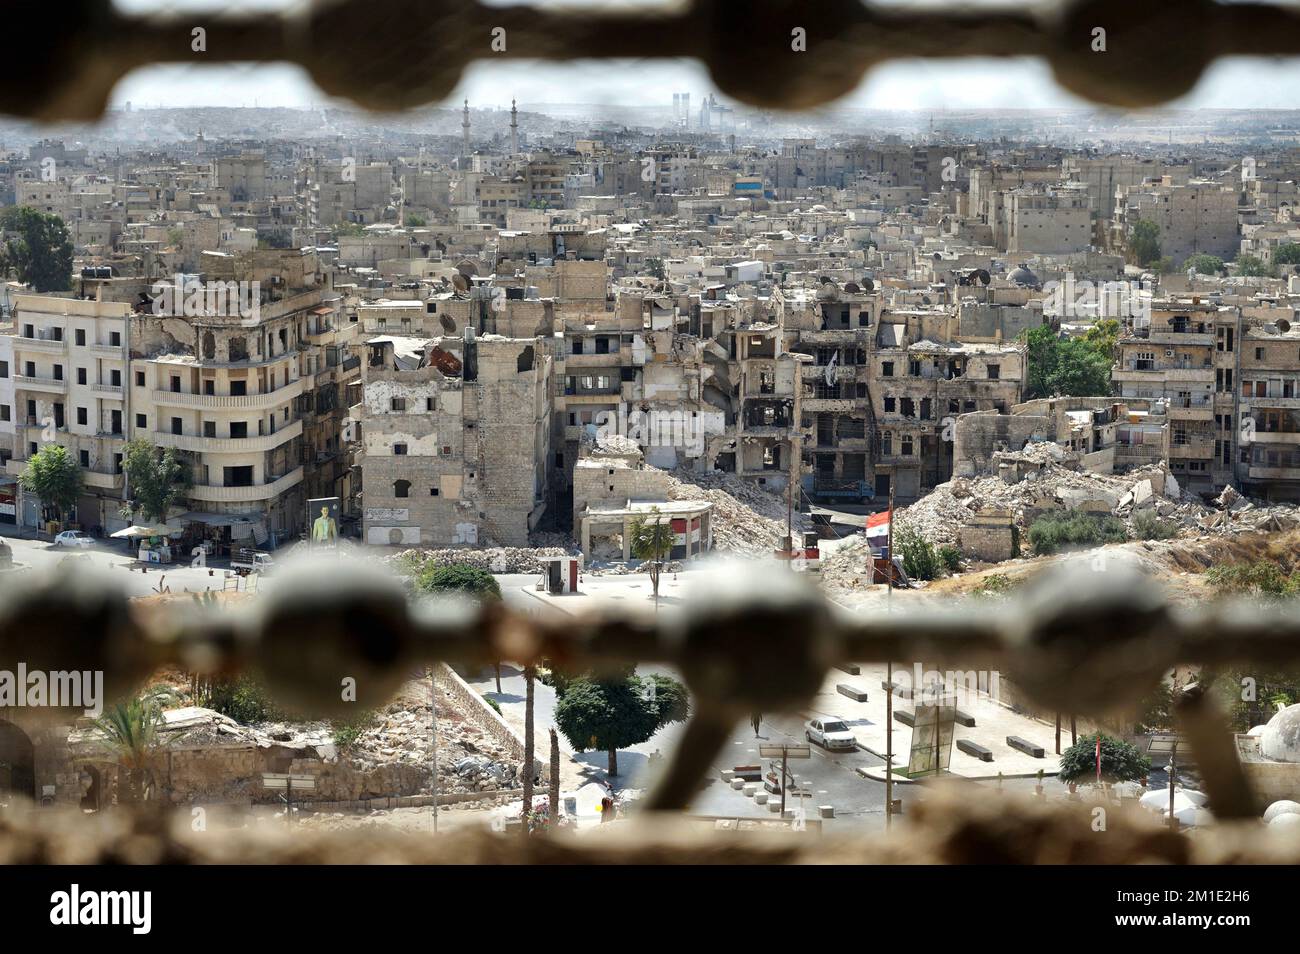 View from the Citadel of Aleppo, Syria Stock Photo